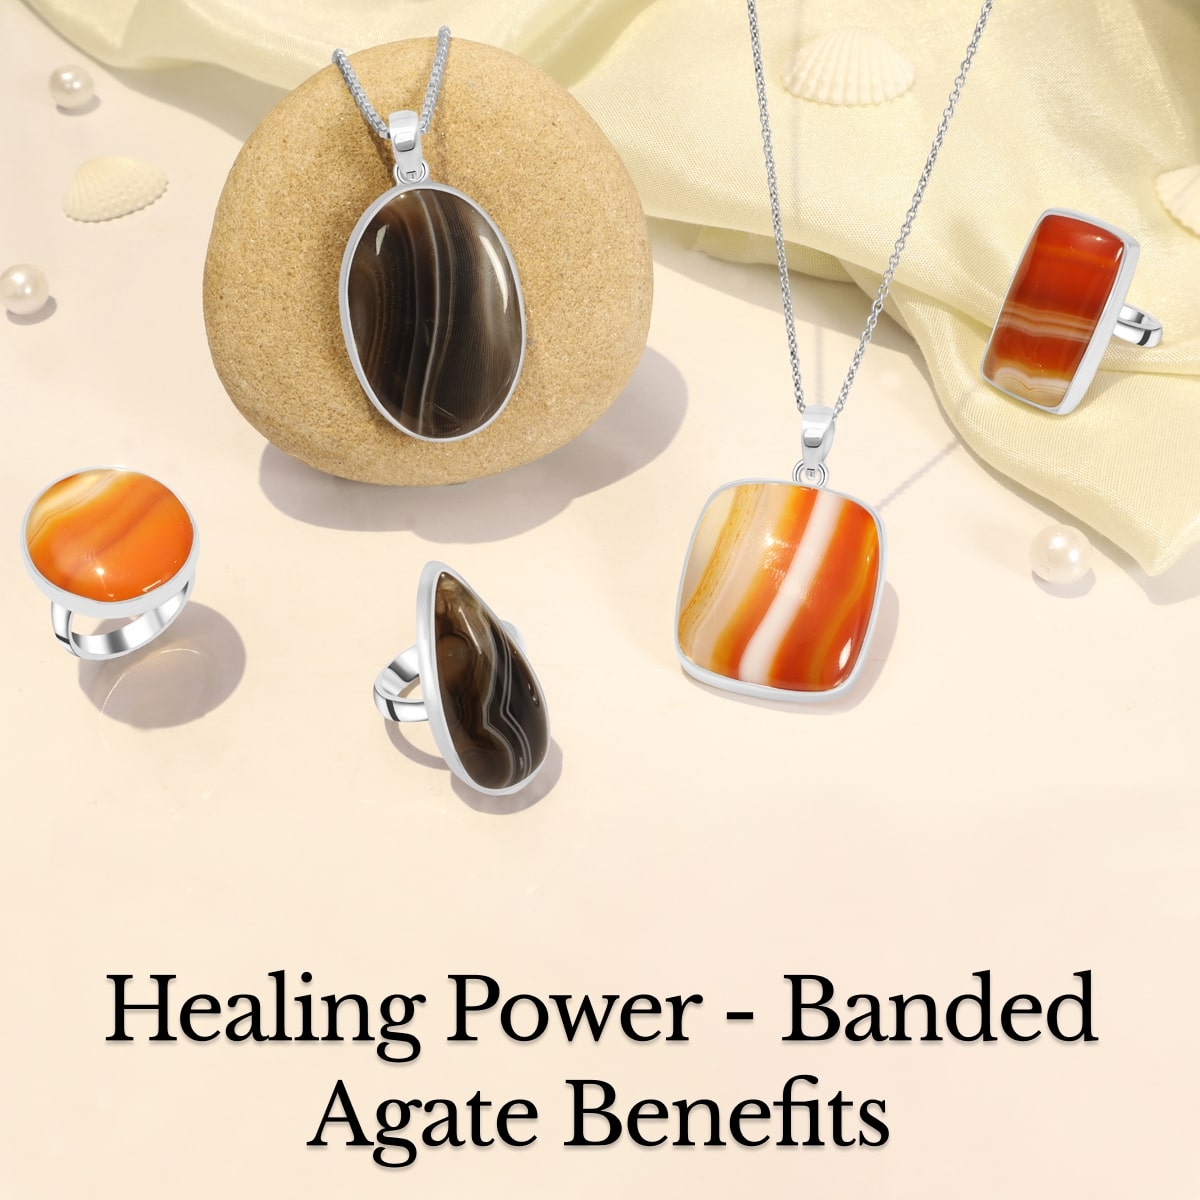 Banded Agate Healing Properties and Benefits